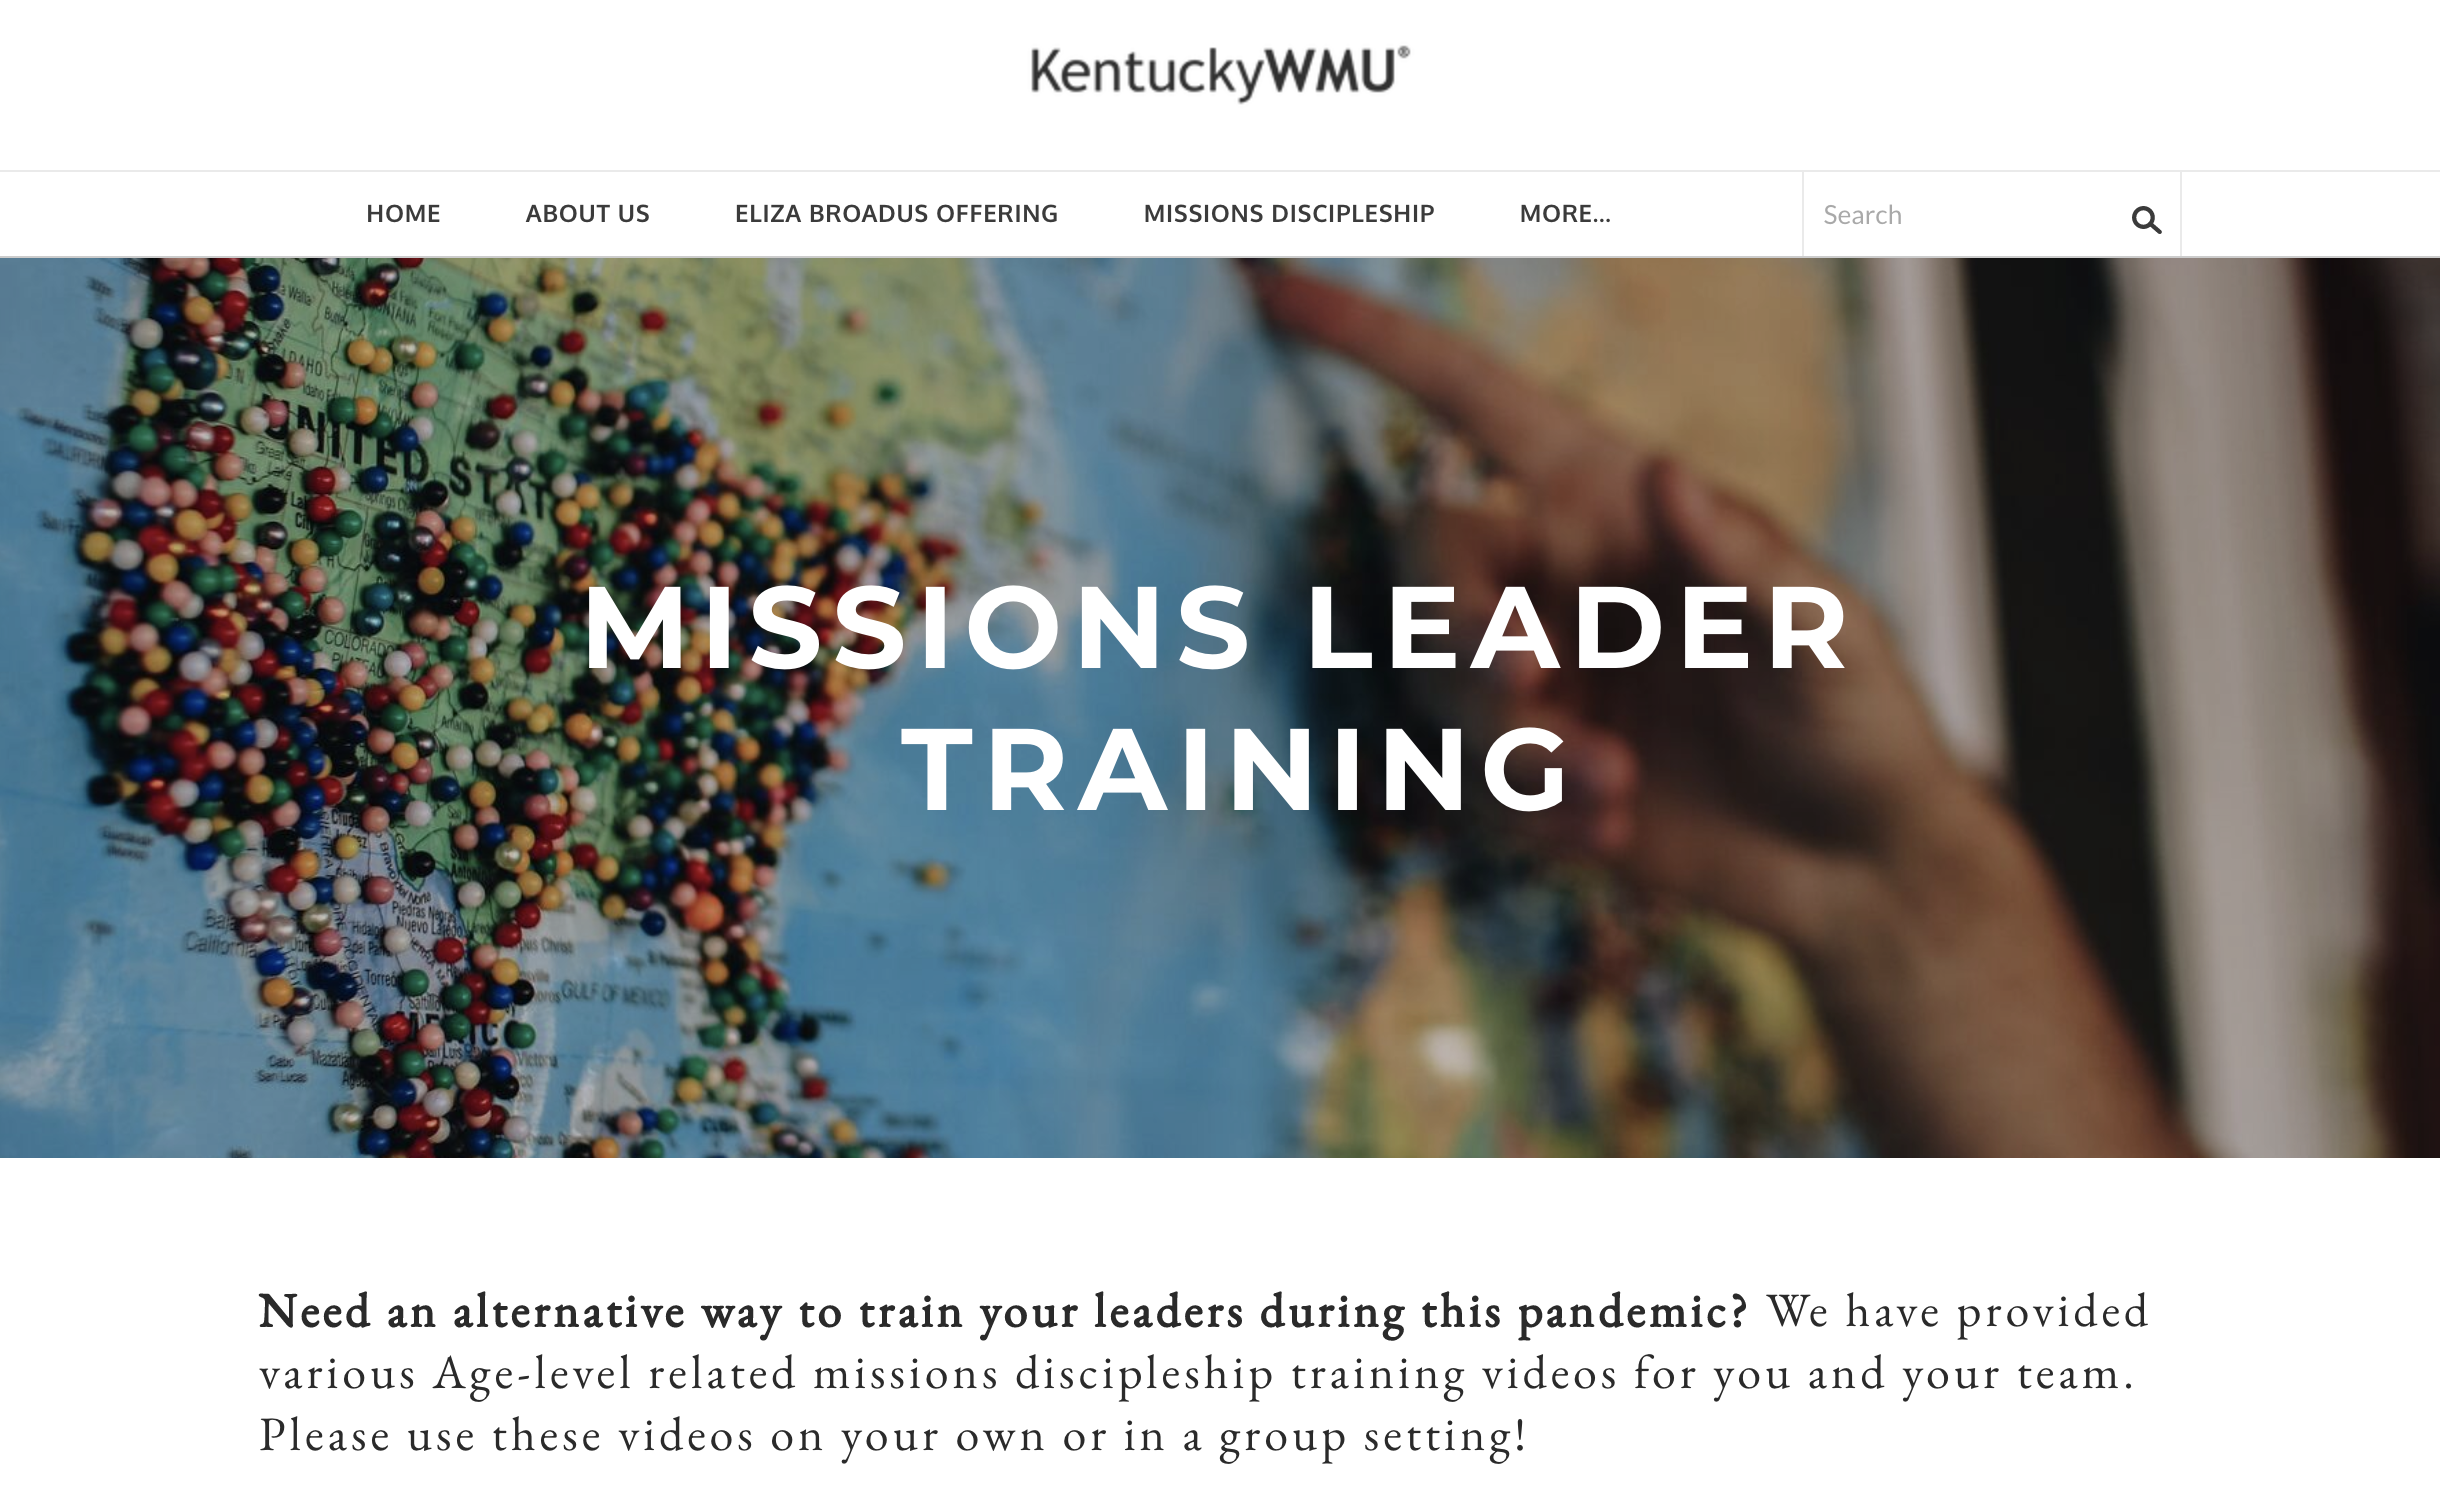 Kentucky WMU began utilizing missions training videos on their Missions Leader Training webpage to support missions education leaders and even parents who teach their children at home.